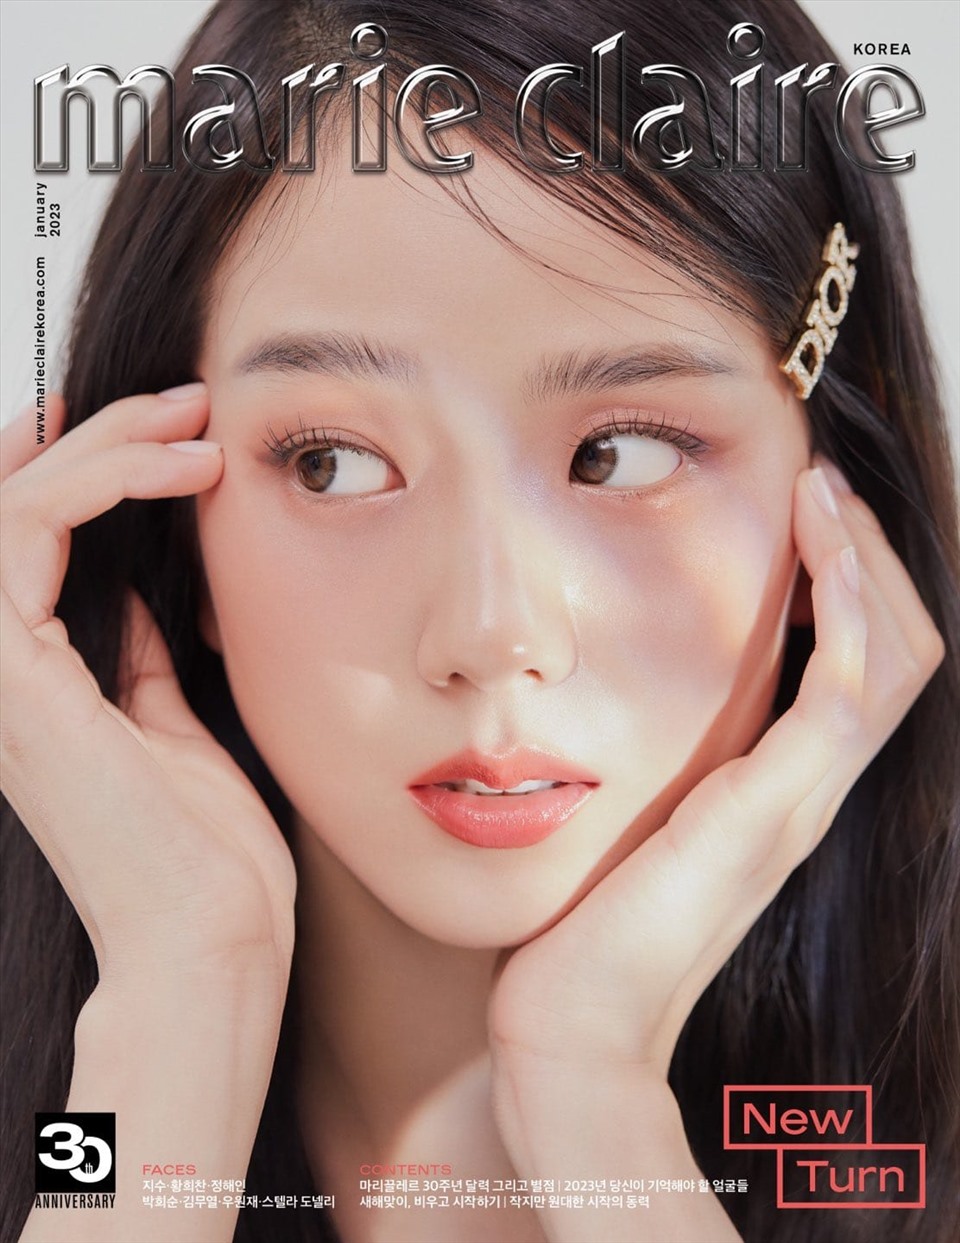 Dior Beauty launches WhatsApp campaign with Blackpinks Jisoo  TheIndustry beauty